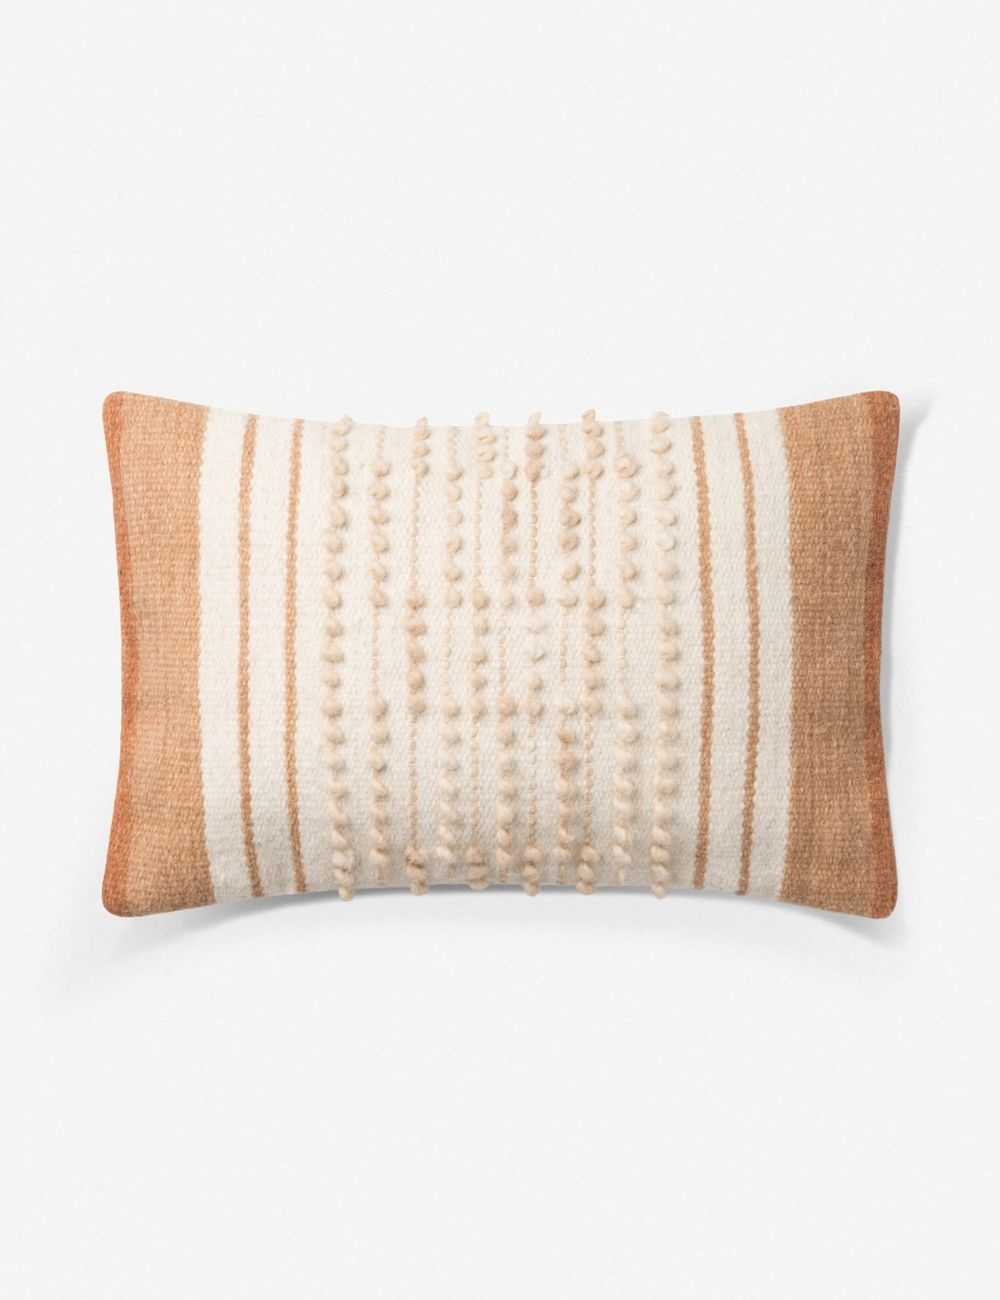 OISE LUMBAR PILLOW, RUST AND NATURAL, ED ELLEN DEGENERES CRAFTED BY LOLOI - Image 0